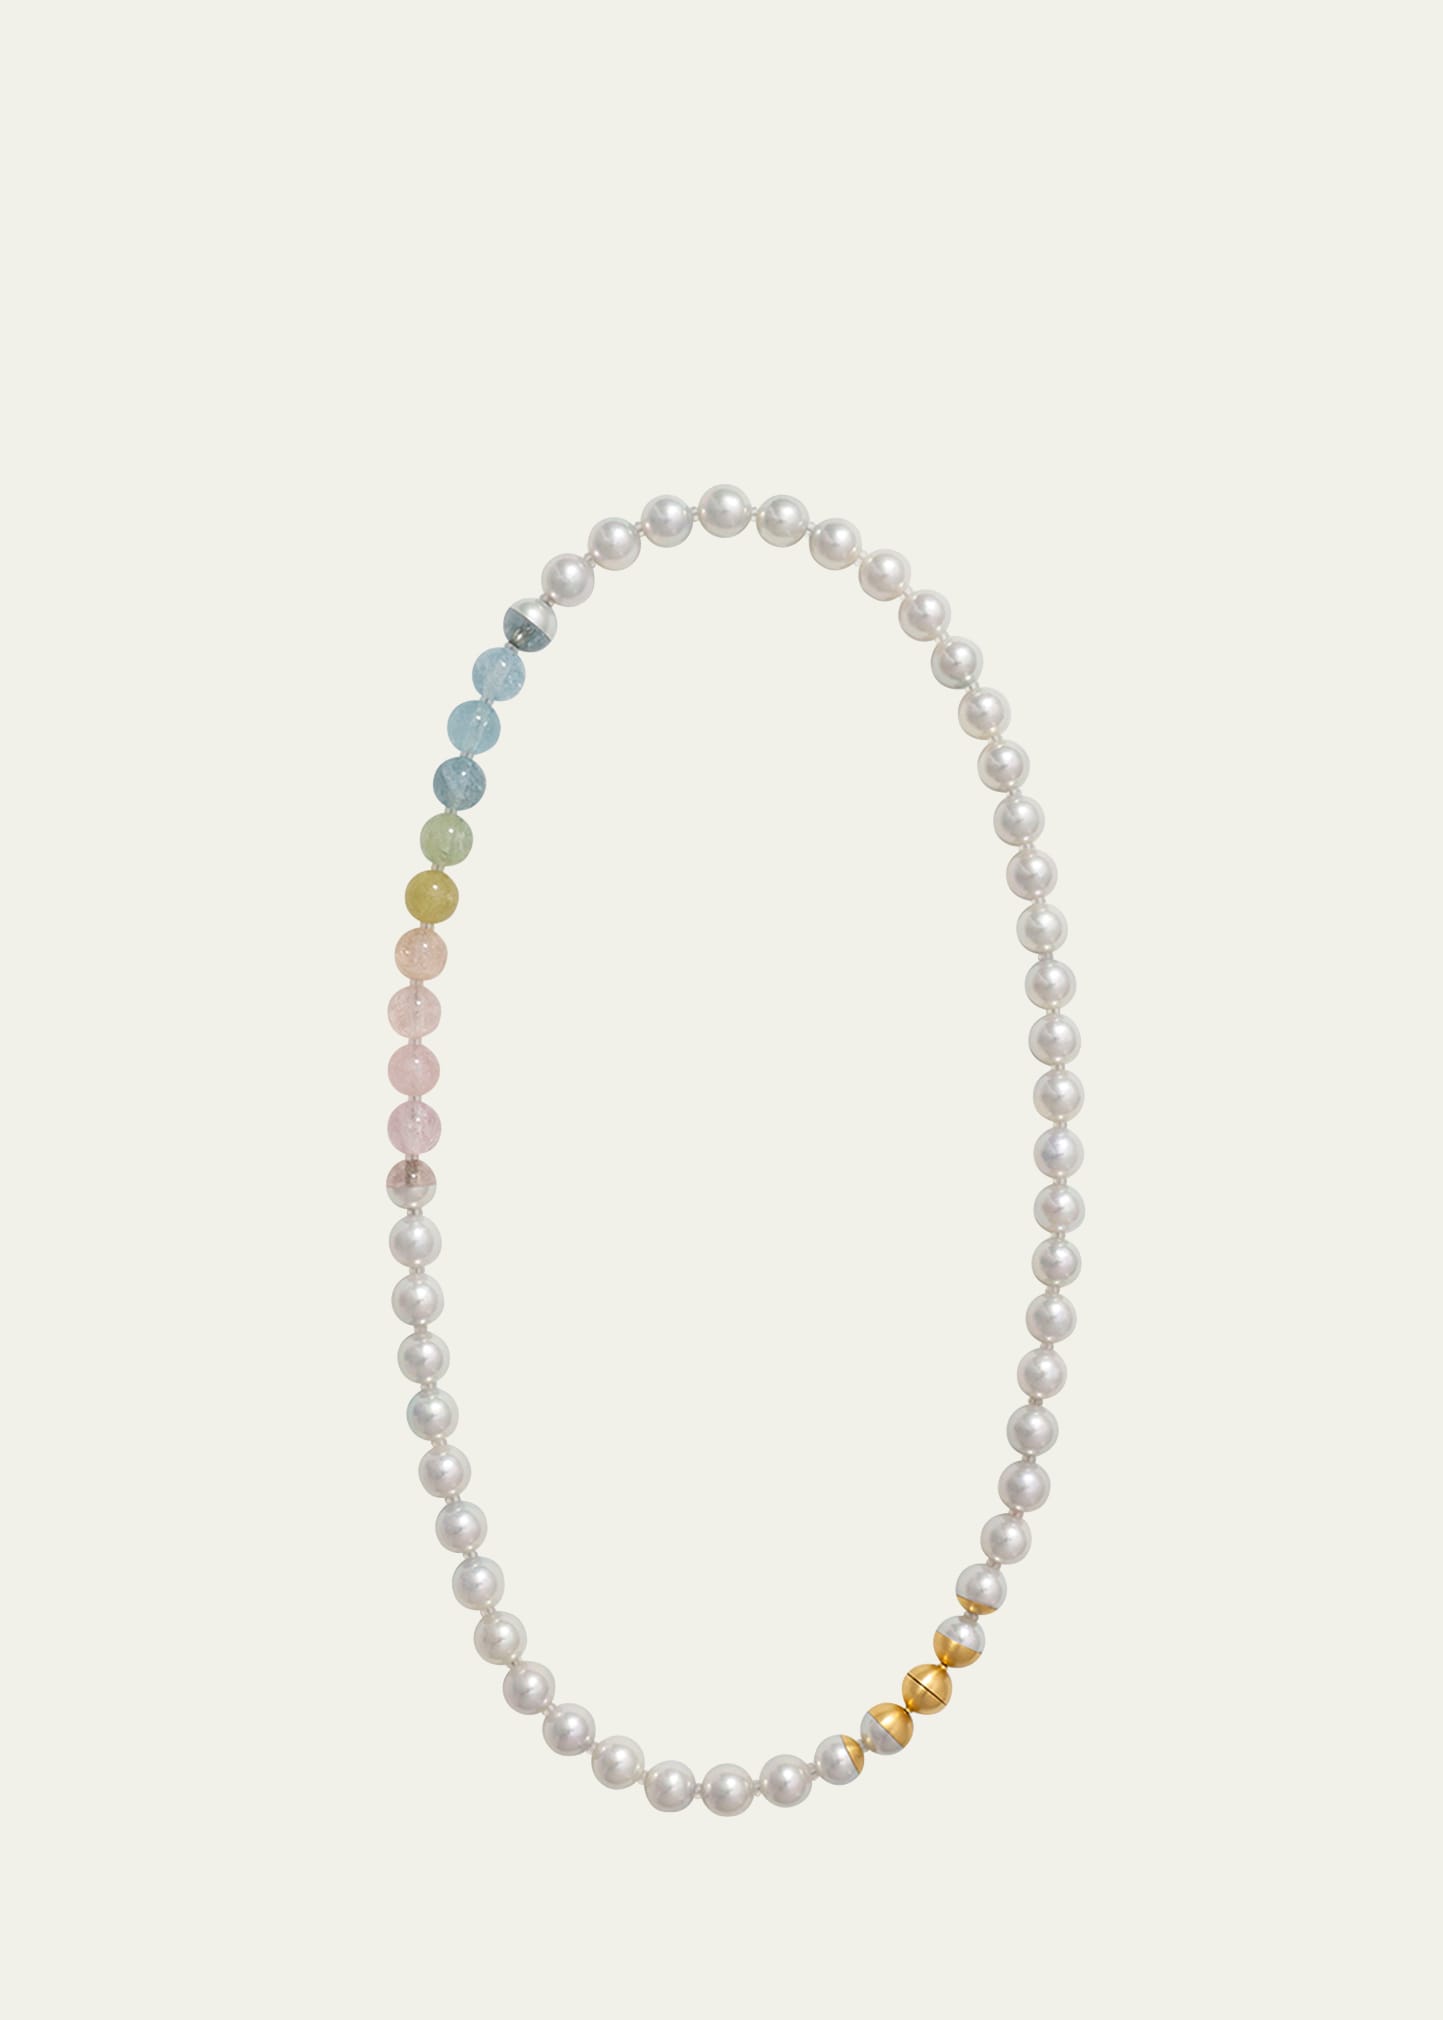 Yutai 18k Yellow Gold Sectional Pearl Necklace With Cultured Akoya Pearls And Mixed Beryl In Neutral